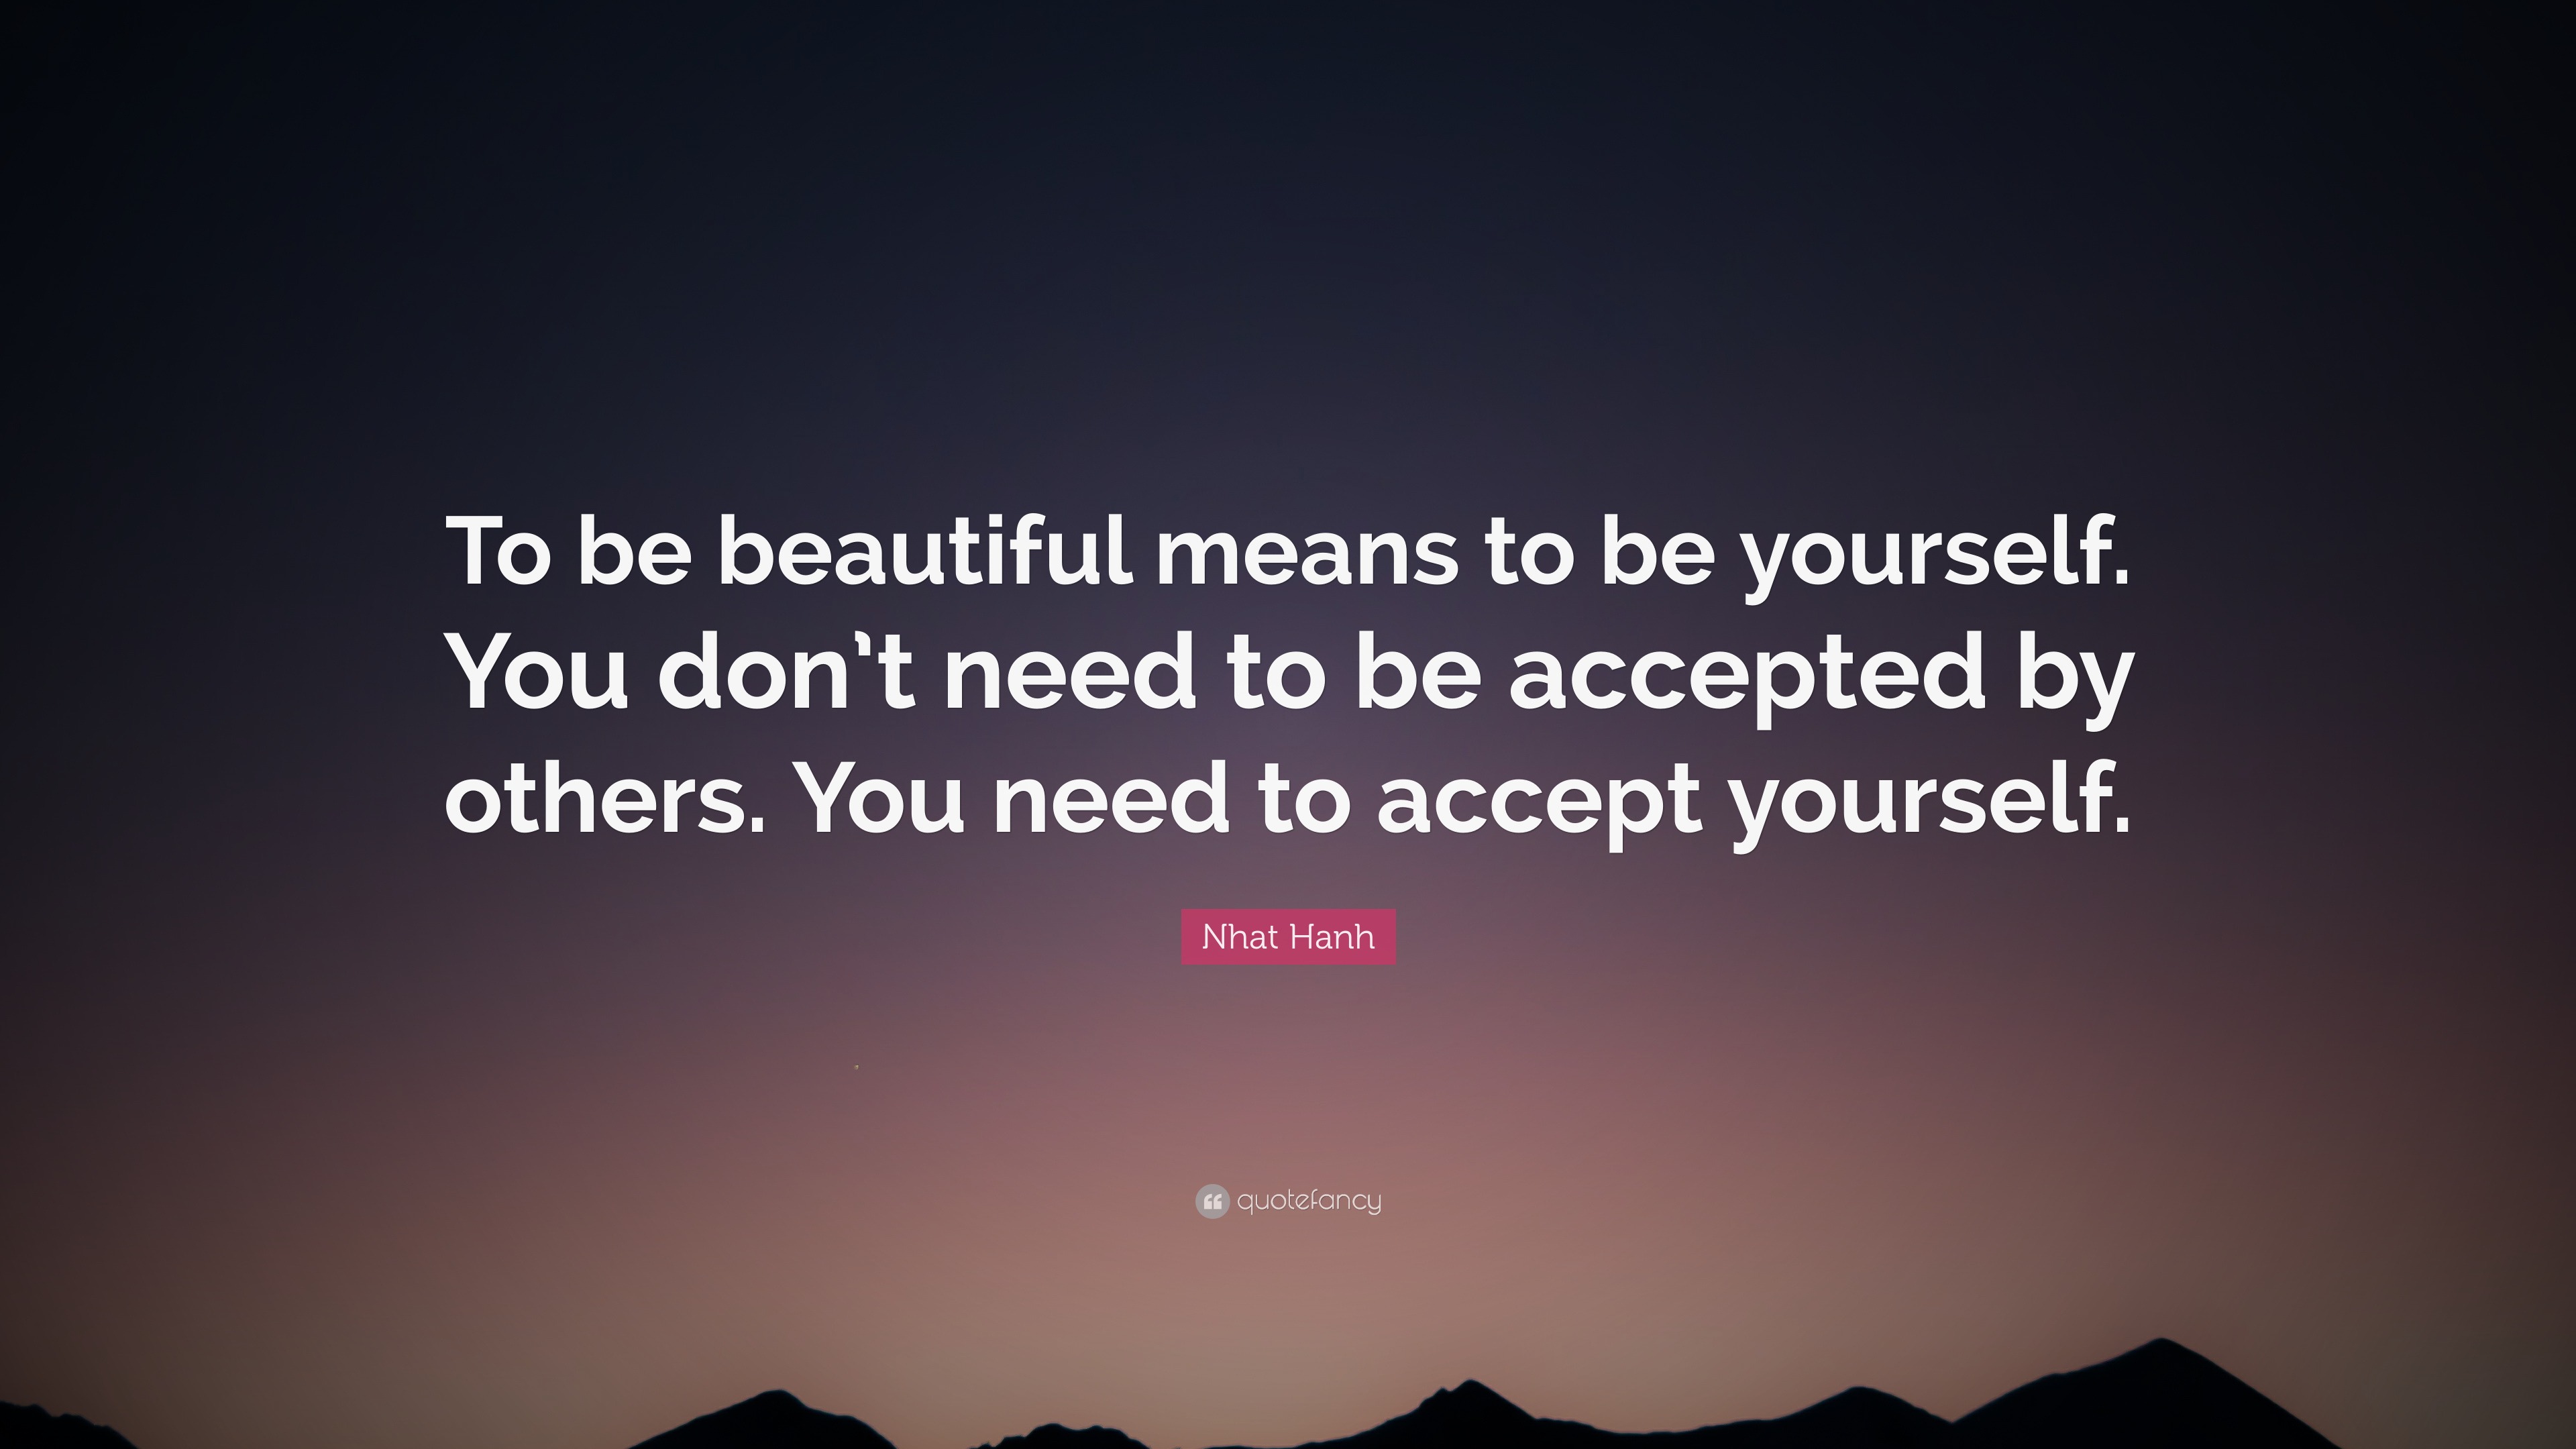 Nhat Hanh Quote: “To be beautiful means to be yourself. You don’t need ...